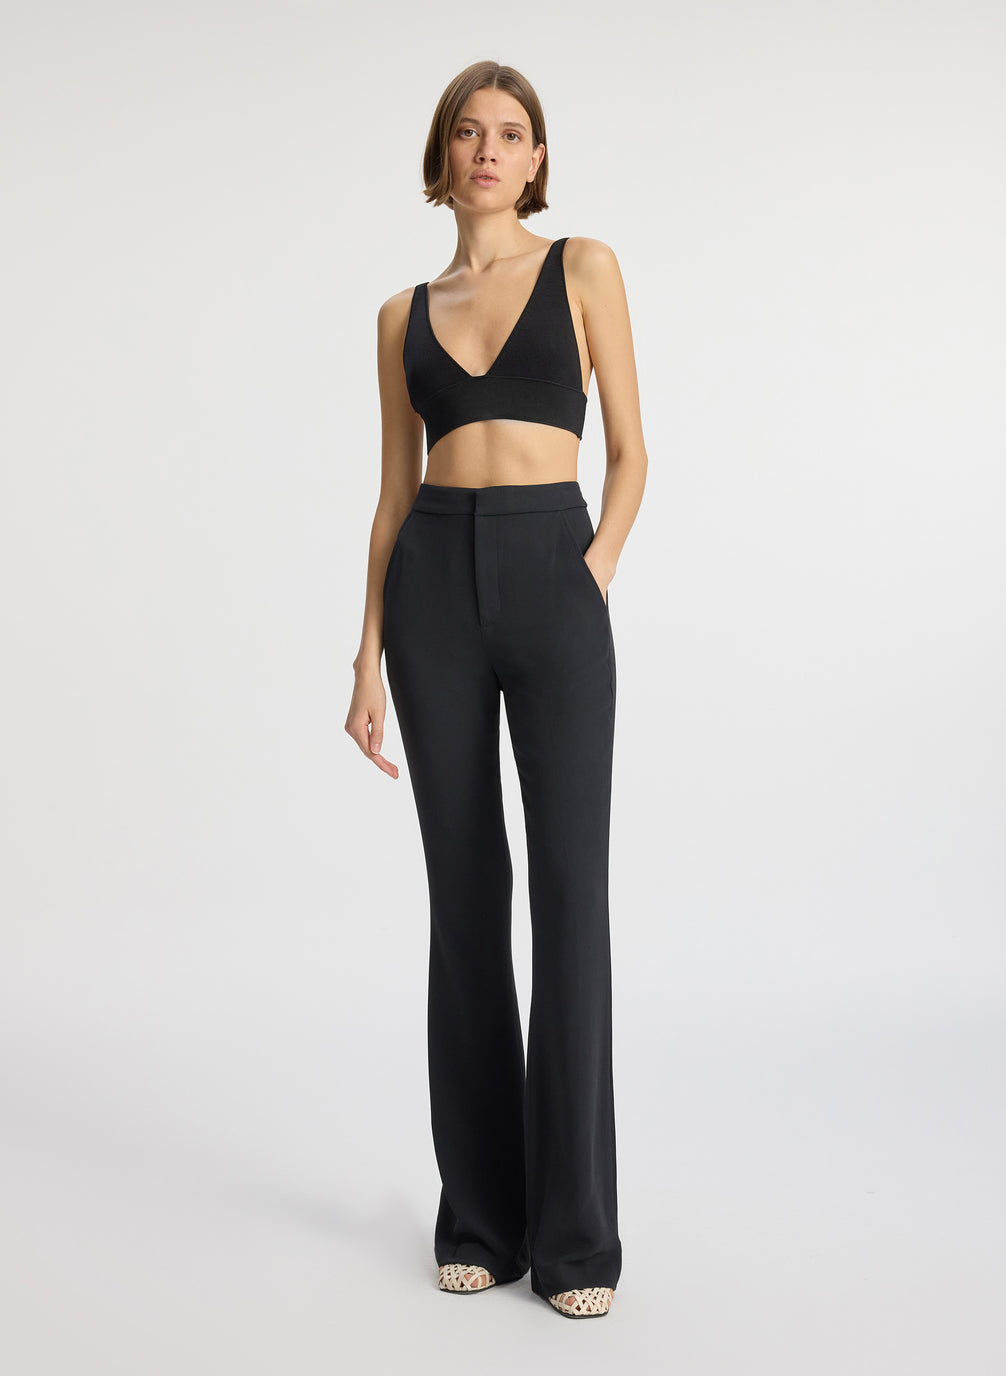 front view of woman wearing black knit bra and black flared pants